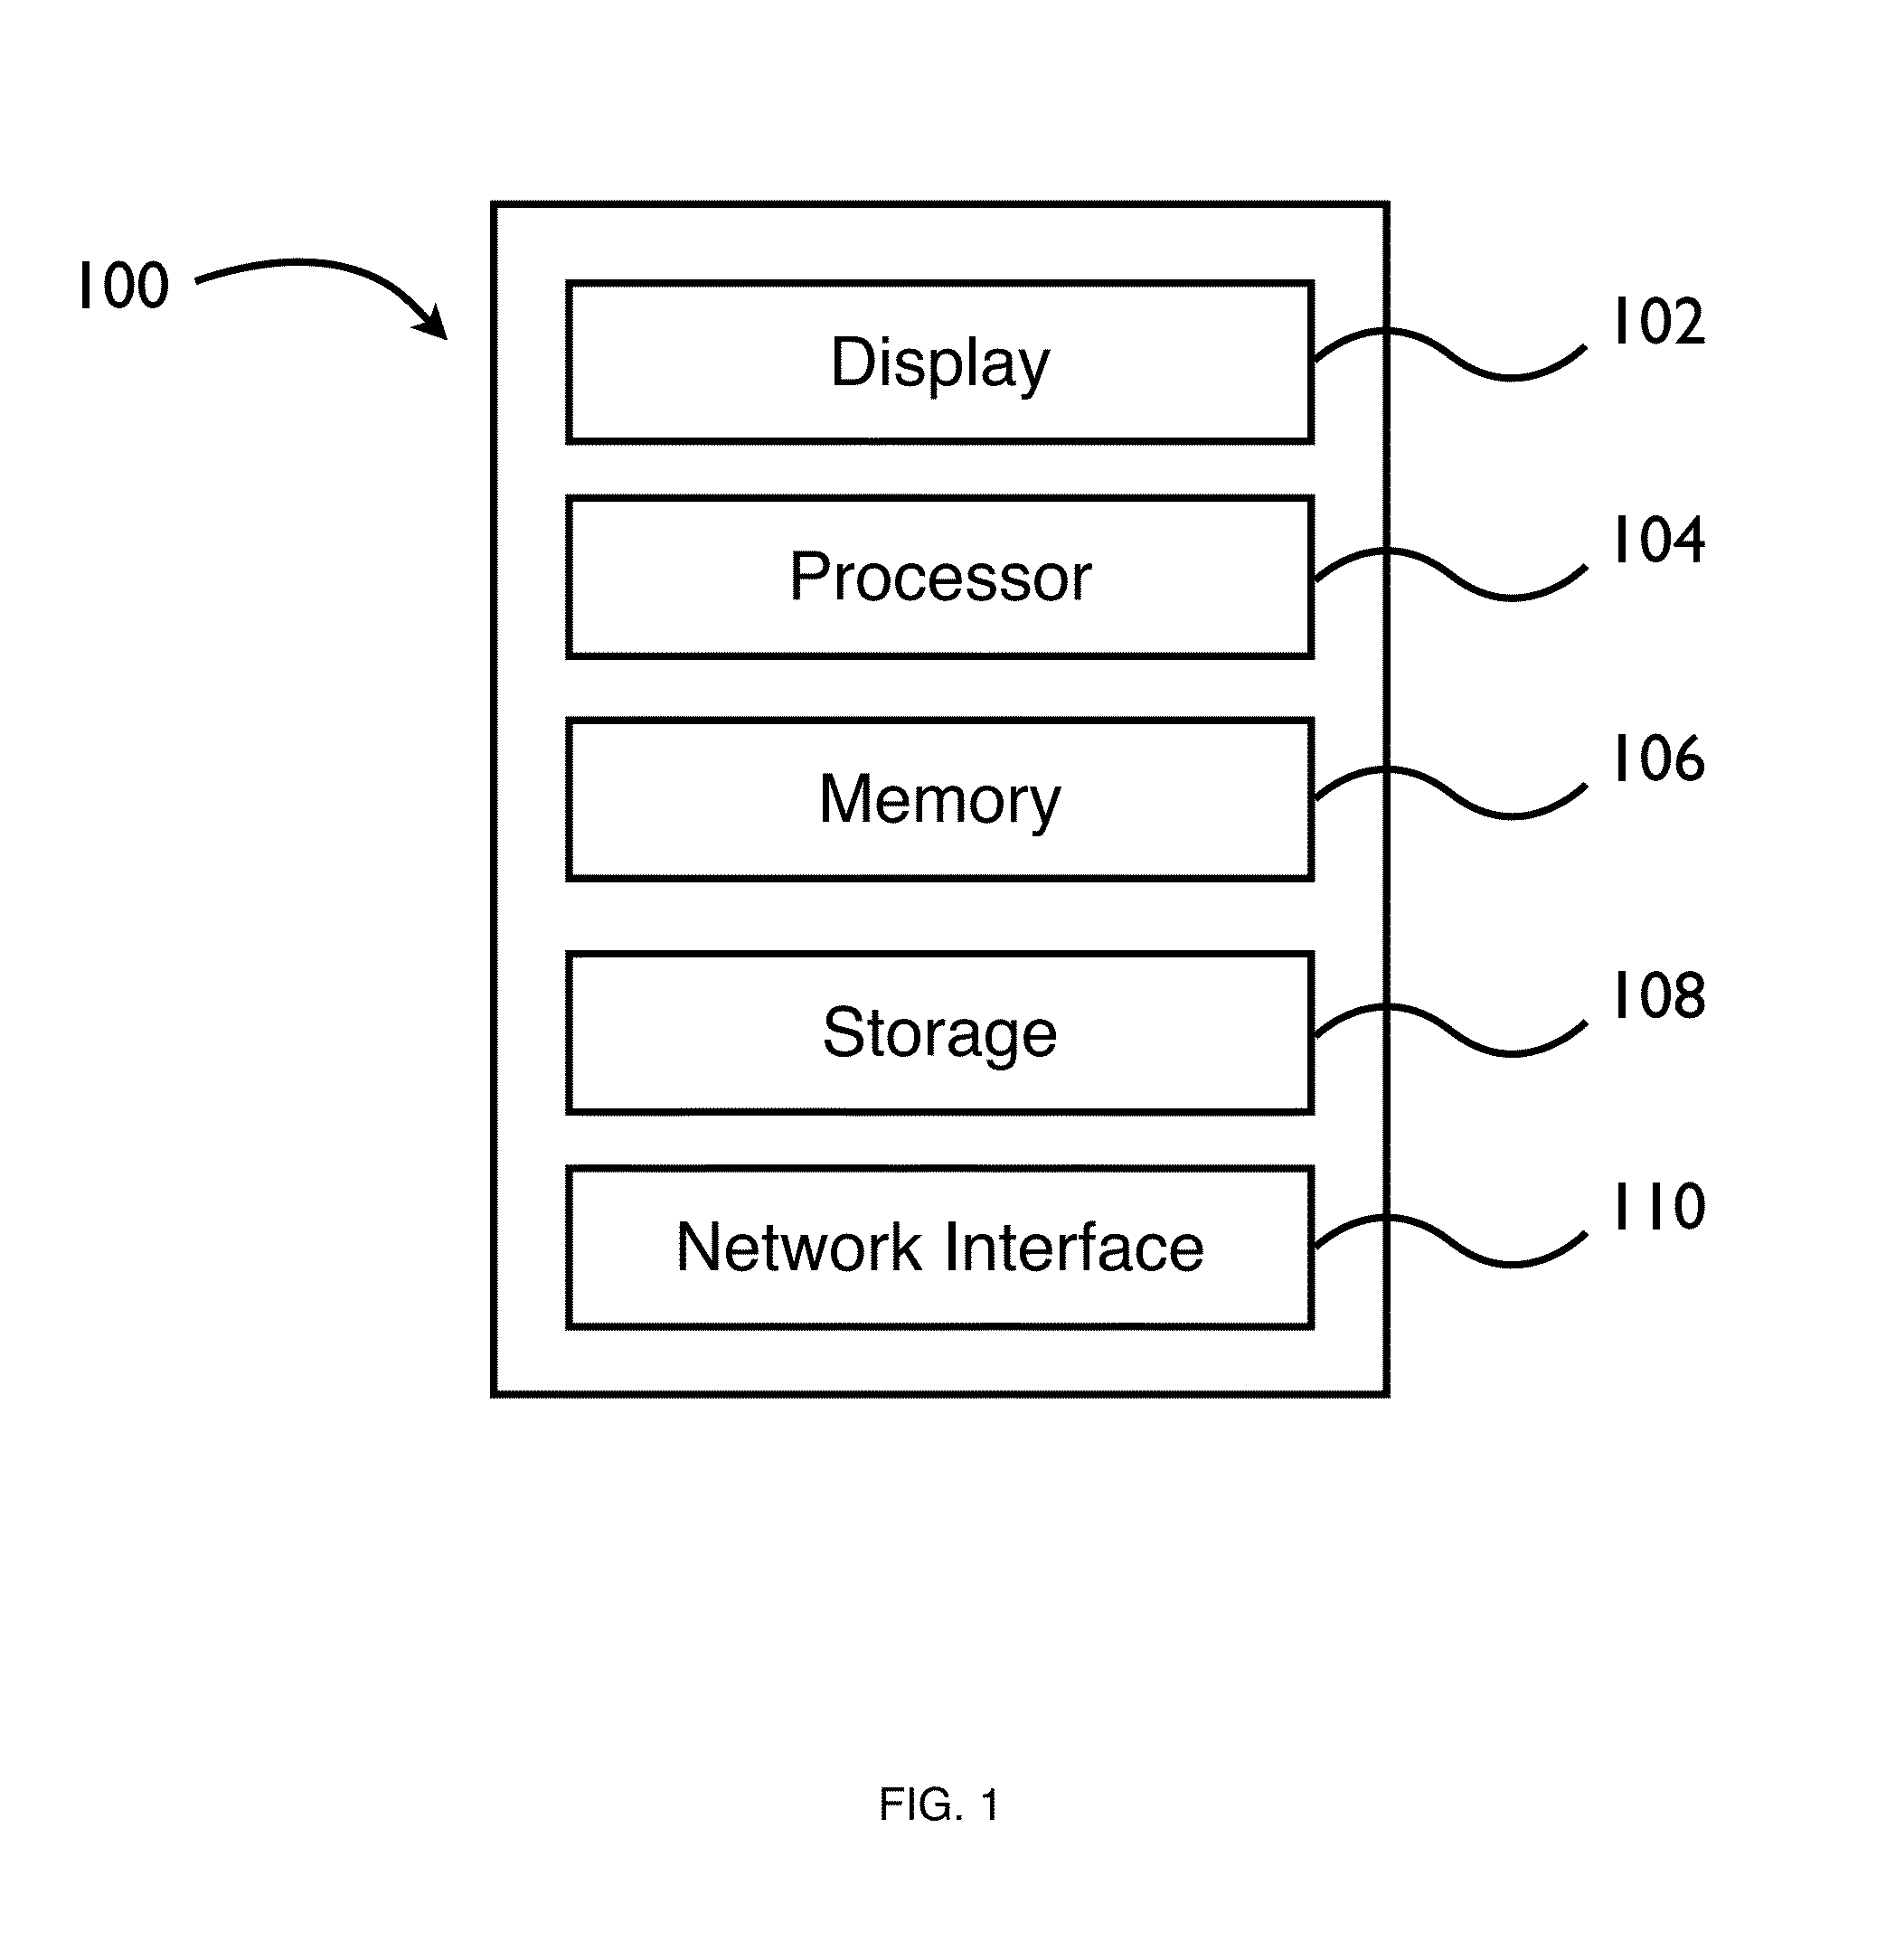 System and method for configuring, sending, receiving and displaying customized messages through customized data channels